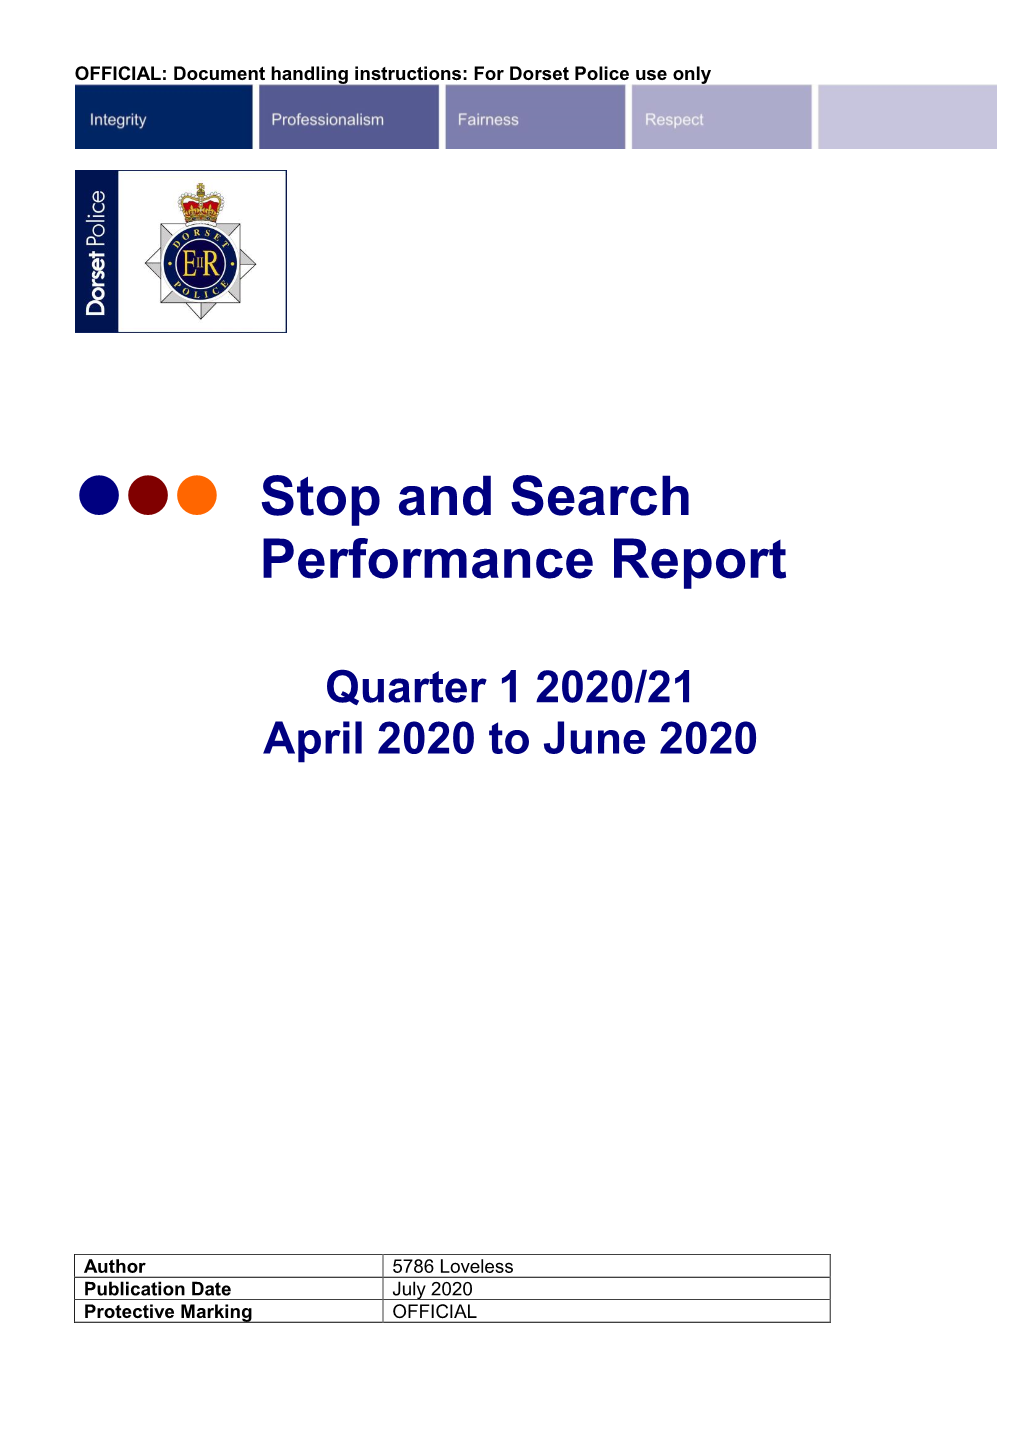 ••• Stop and Search Performance Report